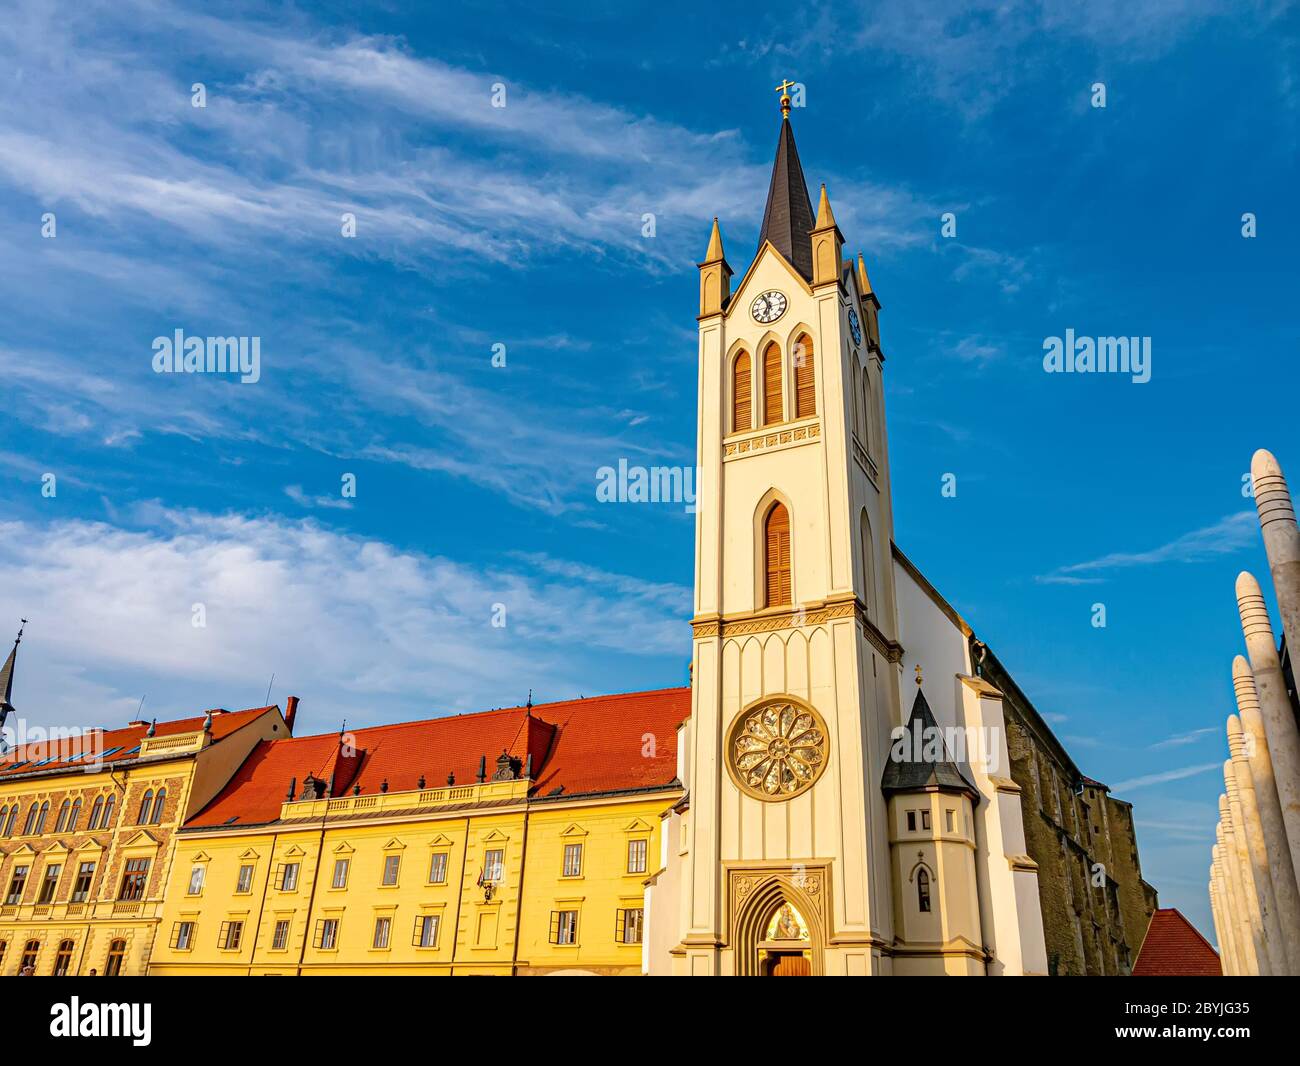 View on the Church of Our Lady Magyarok Nagyasszonya Templom in Keszthely, Hungary Stock Photo